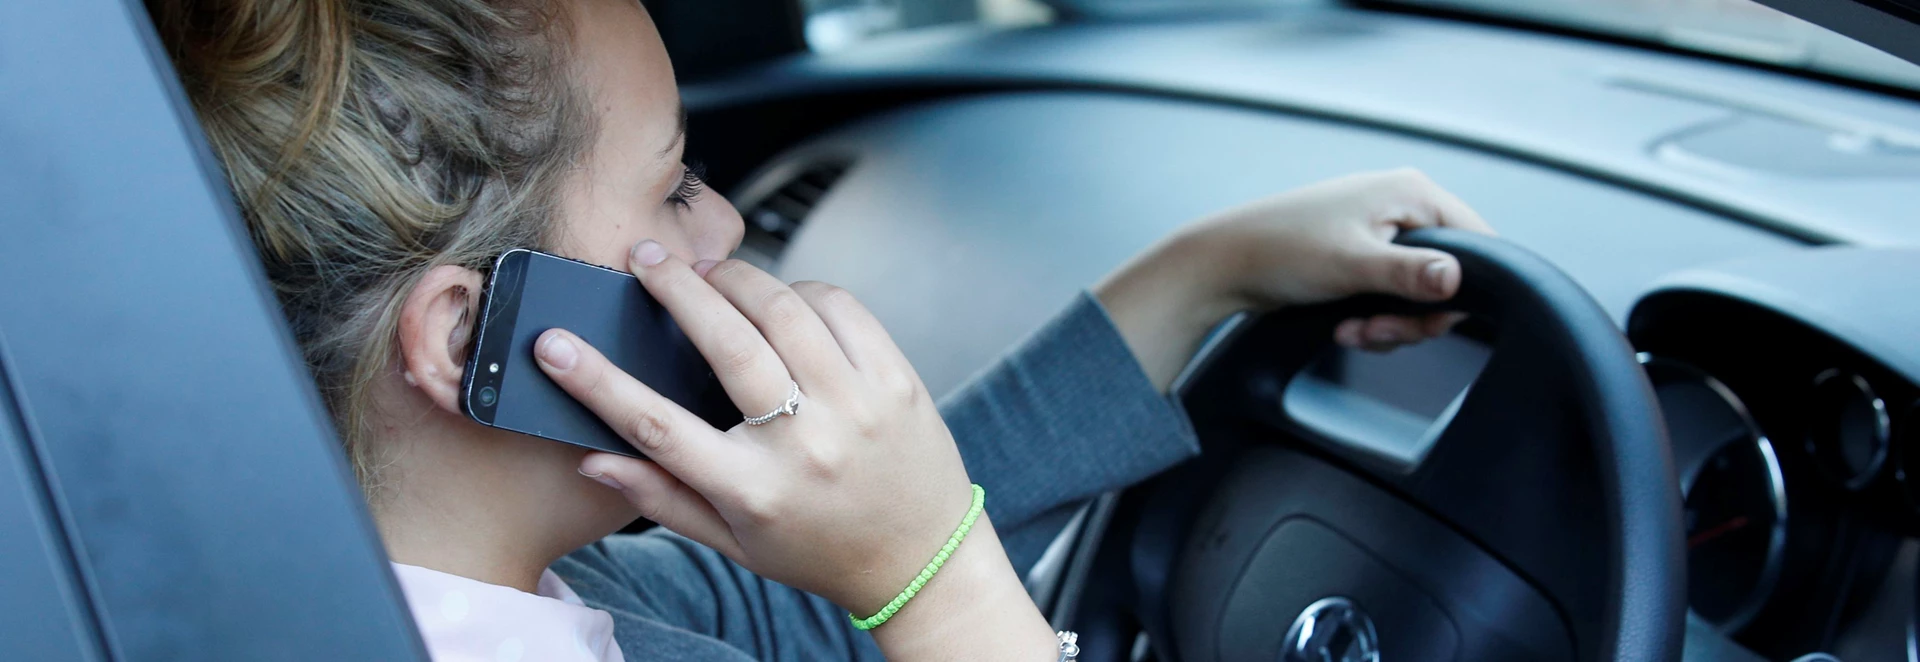 Nine million drivers refuse to put their phone down while at the wheel 